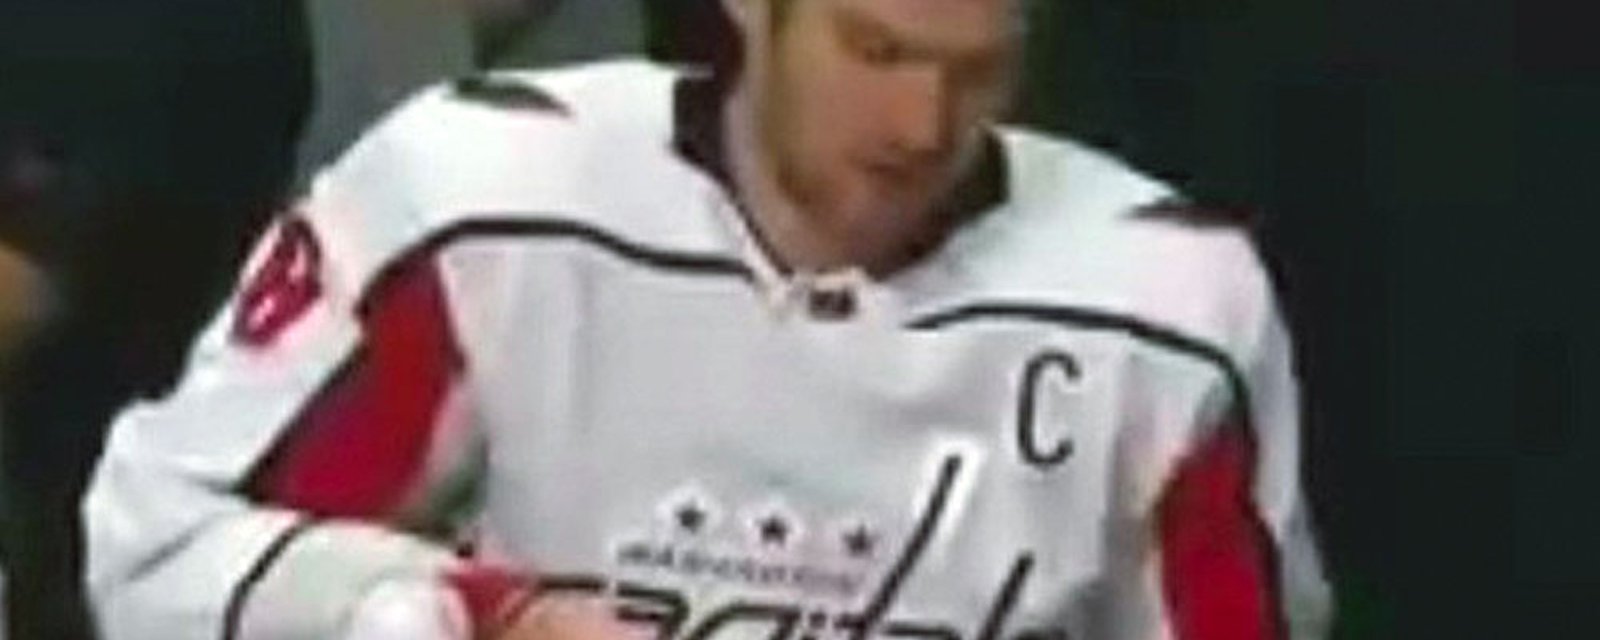 Ovechkin just casually using a blowtorch on the bench during last night’s game